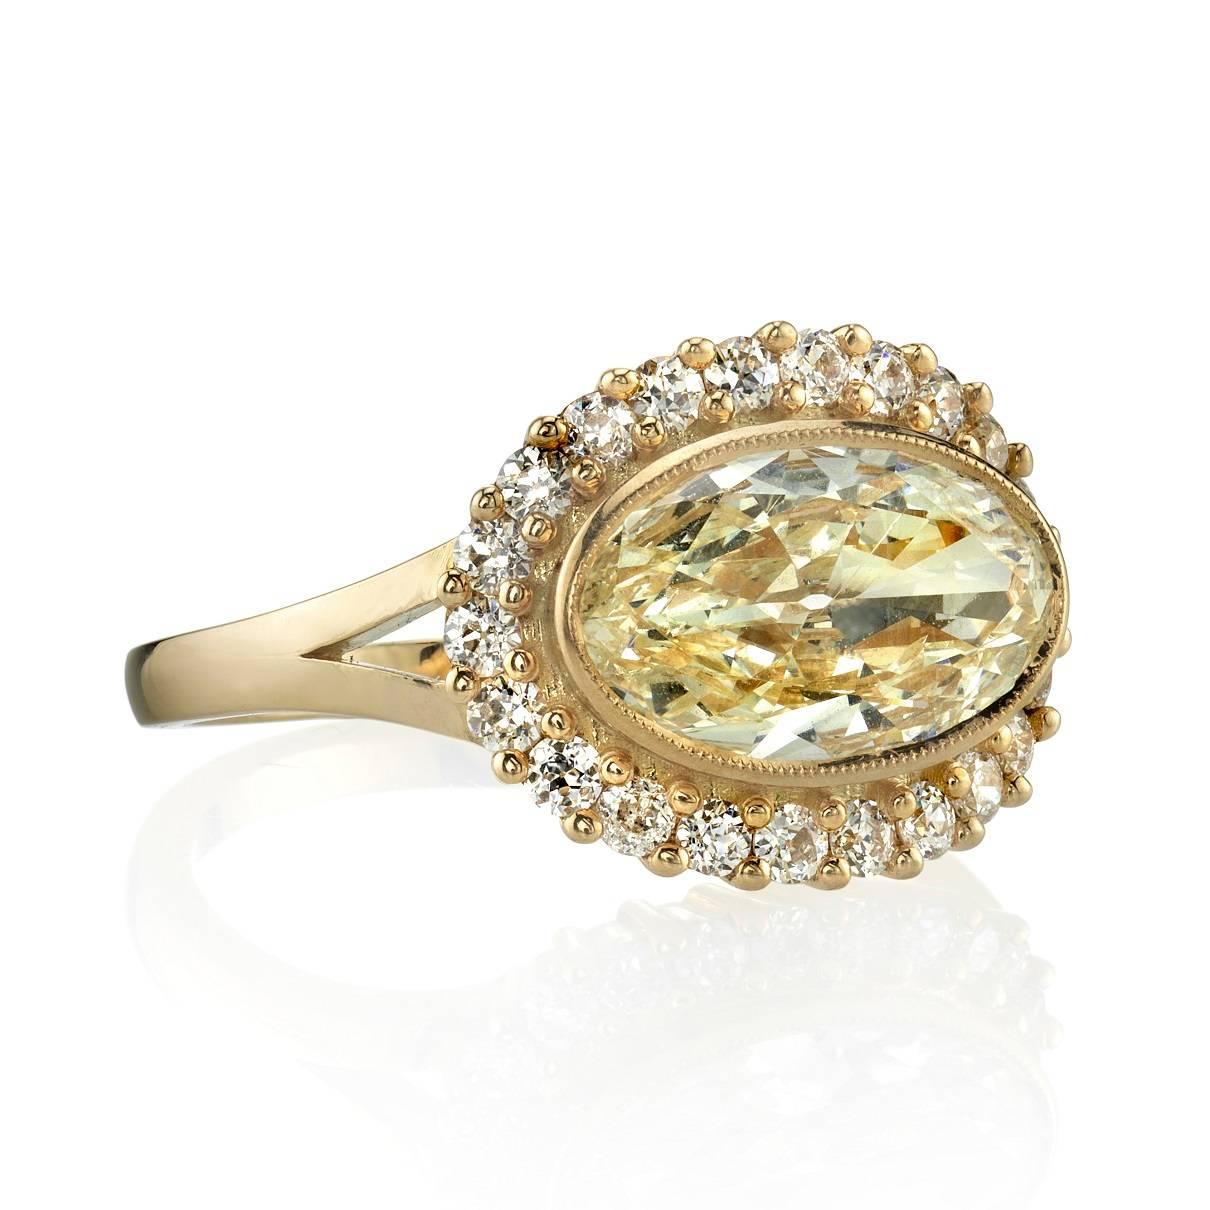 1.63ctw J/SI2 EGL certified Oval cut diamond with 0.15ctw old European cut accent diamonds set in a handcrafted 18k yellow gold mounting. 

Ring is currently a size 6 and can be sized to fit.

Our jewelry is made locally in Los Angeles and most